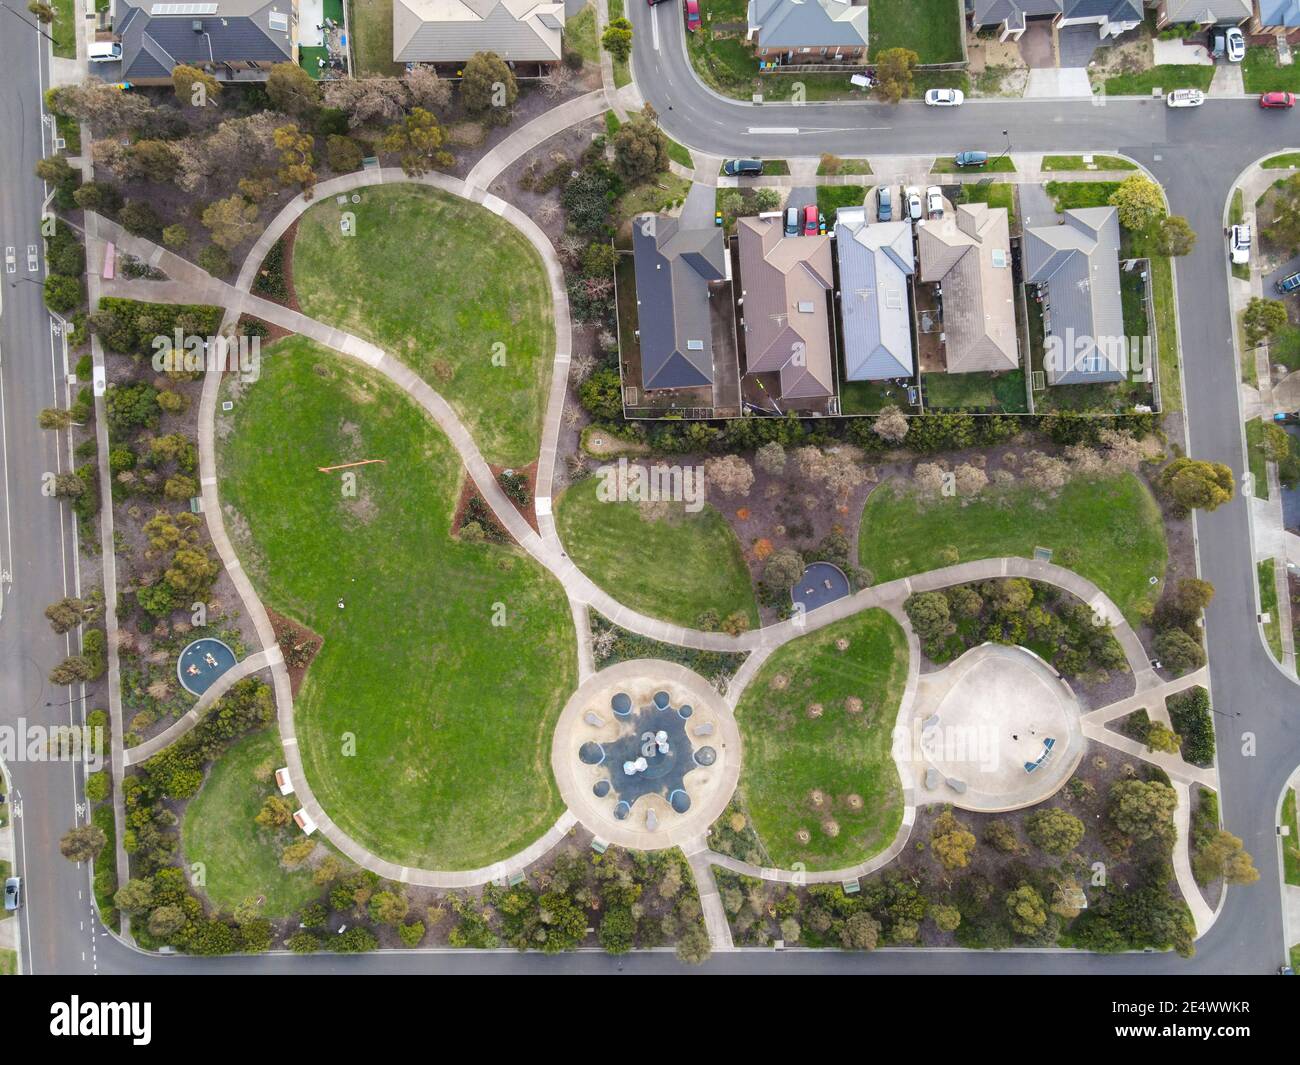 Suburban Community Park from Above Aerial View Stock Photo